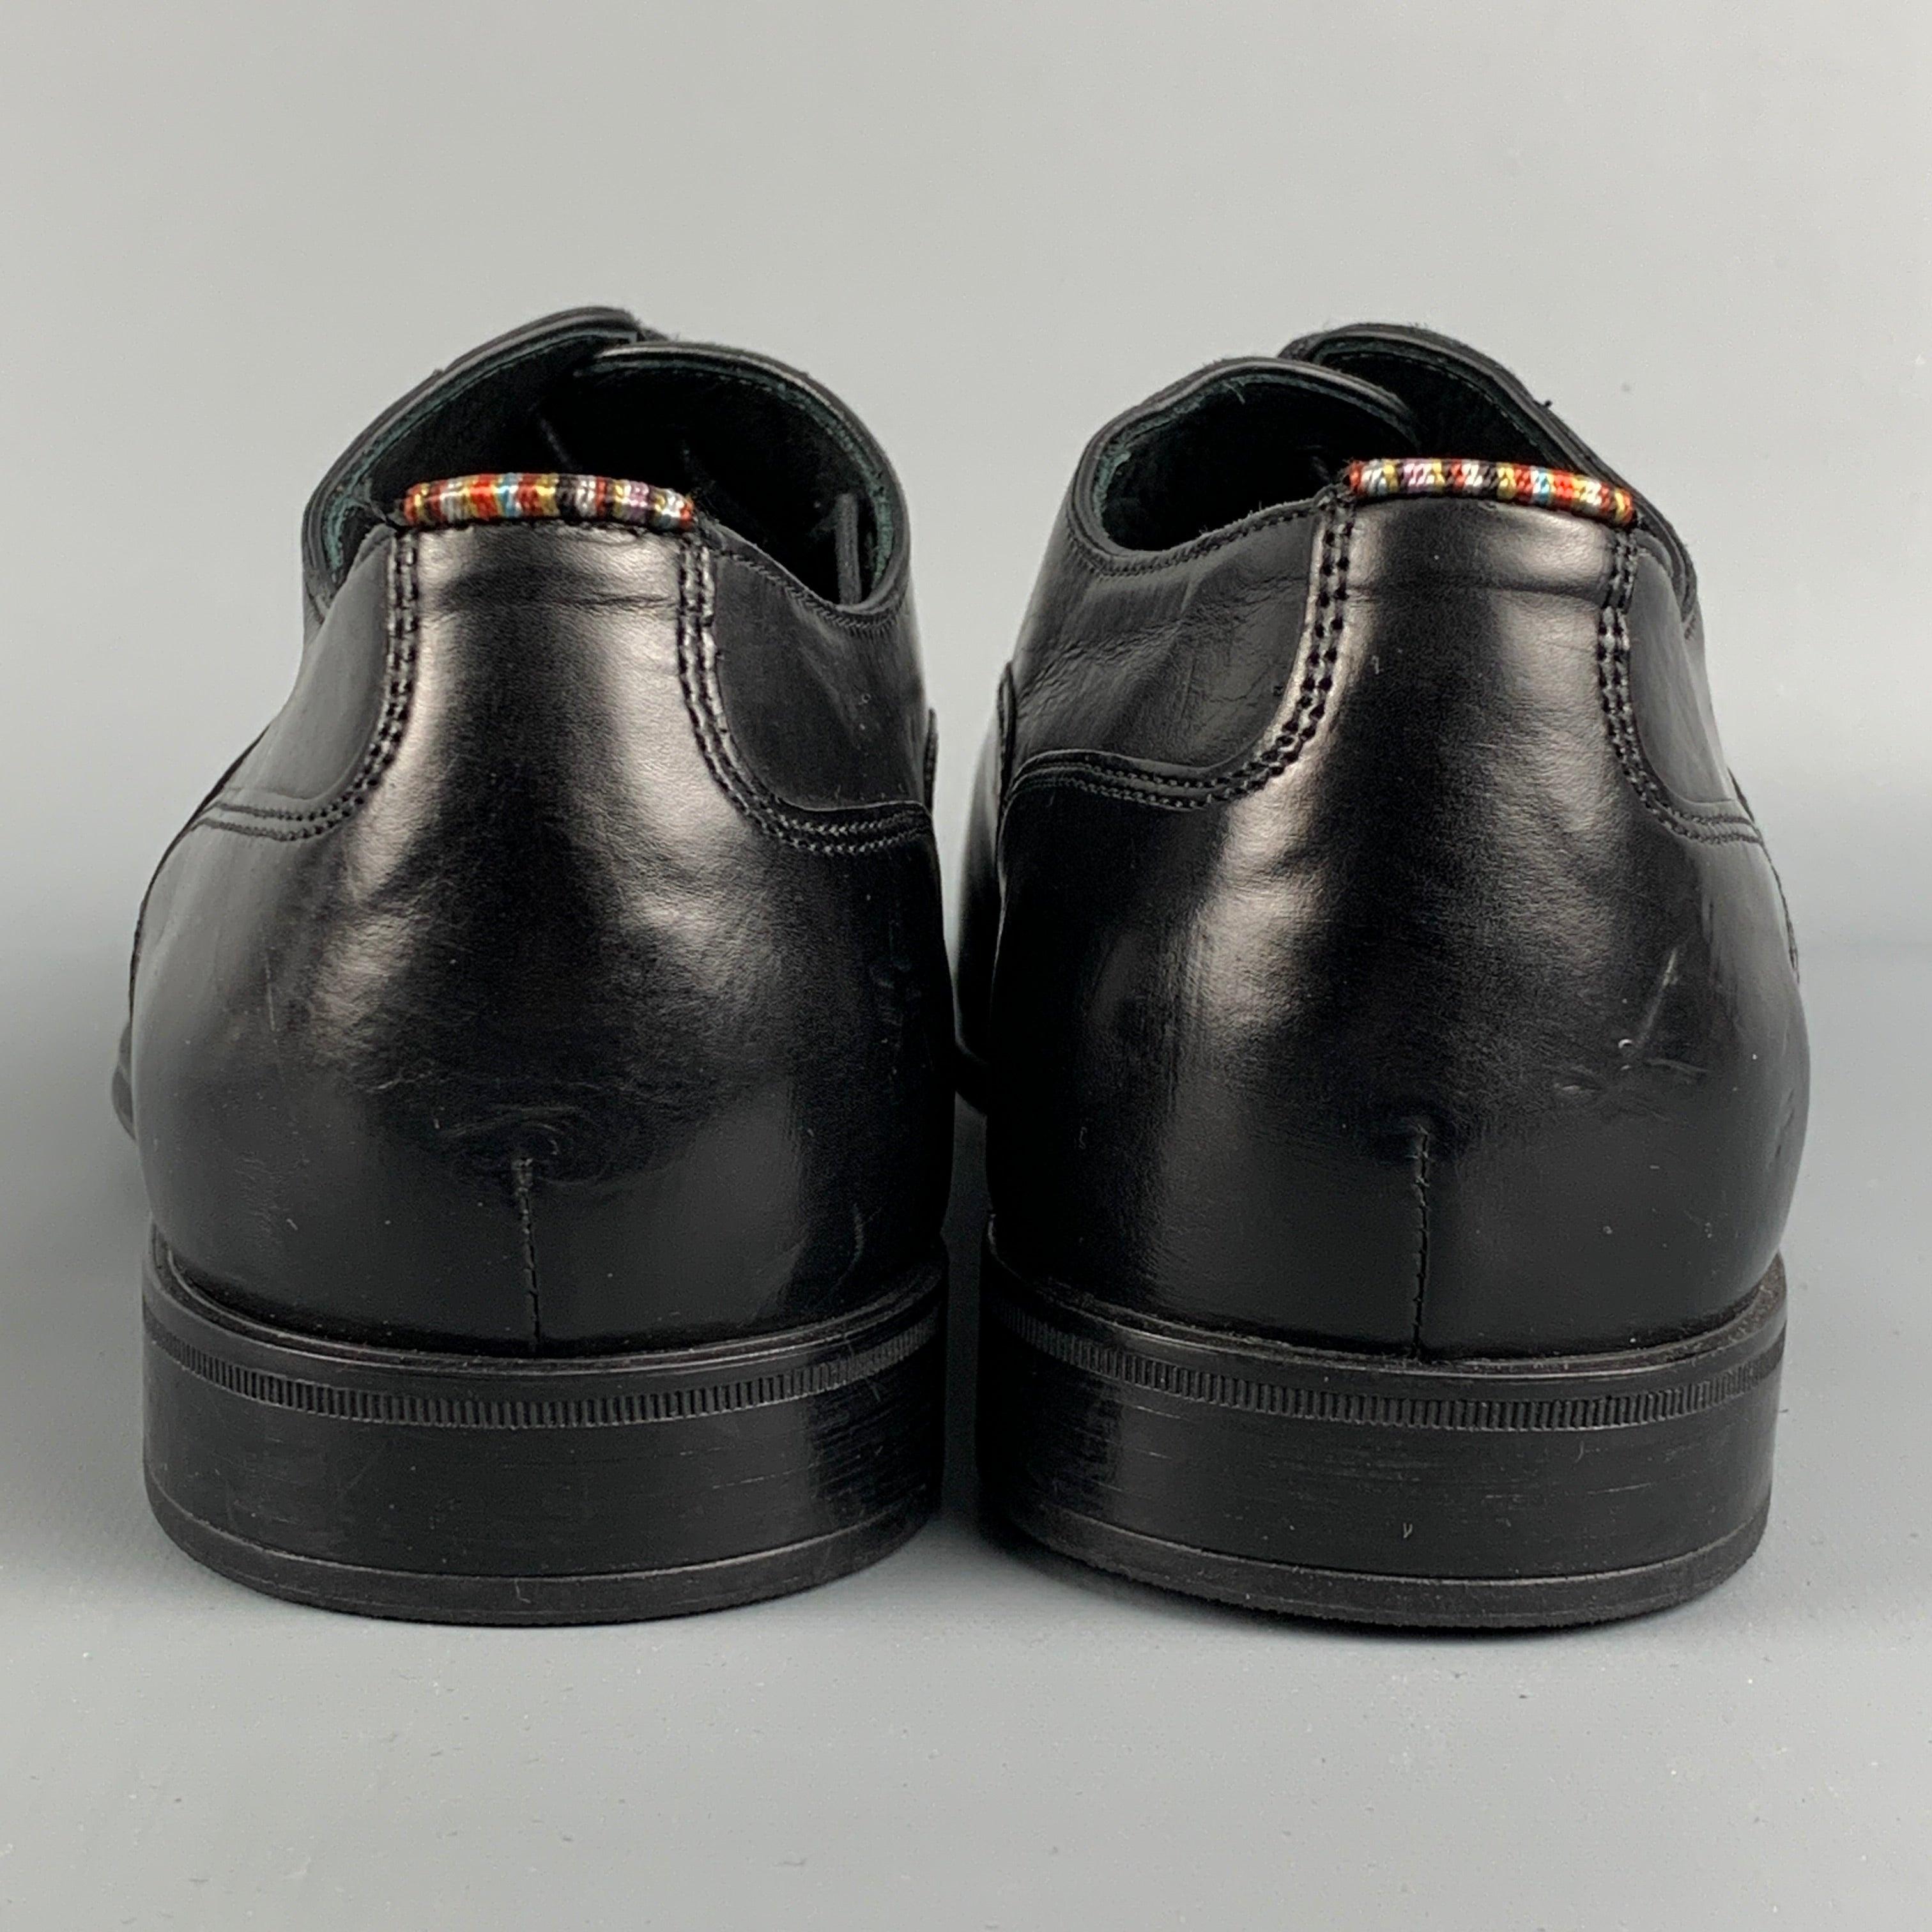 PAUL SMITH Size 8 Black Leather Lace Up Dress Shoes For Sale 1